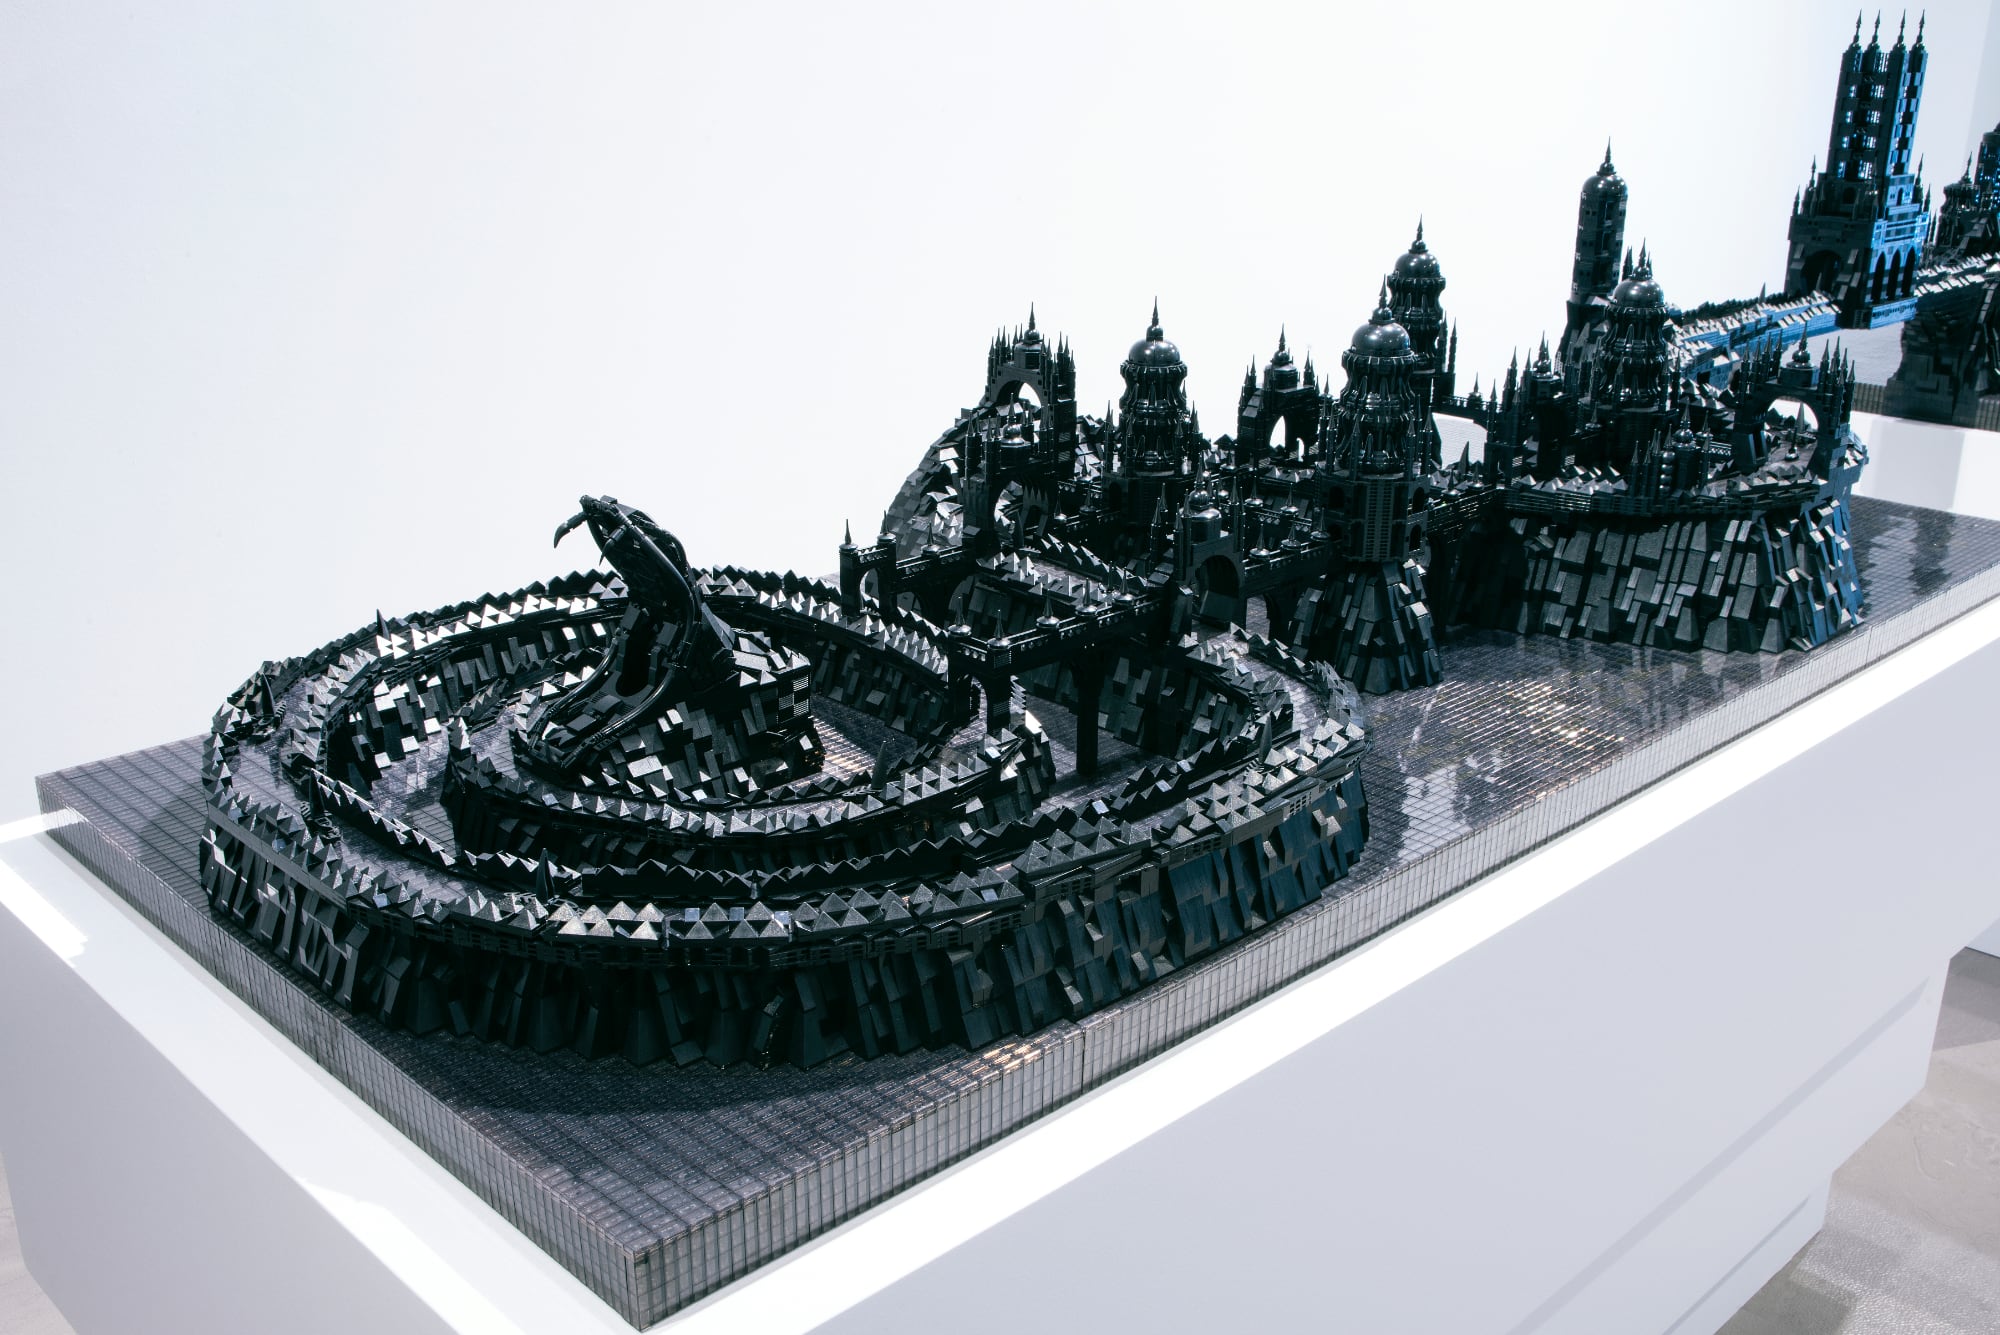 A photo of a detailed cityscape made of black LEGO